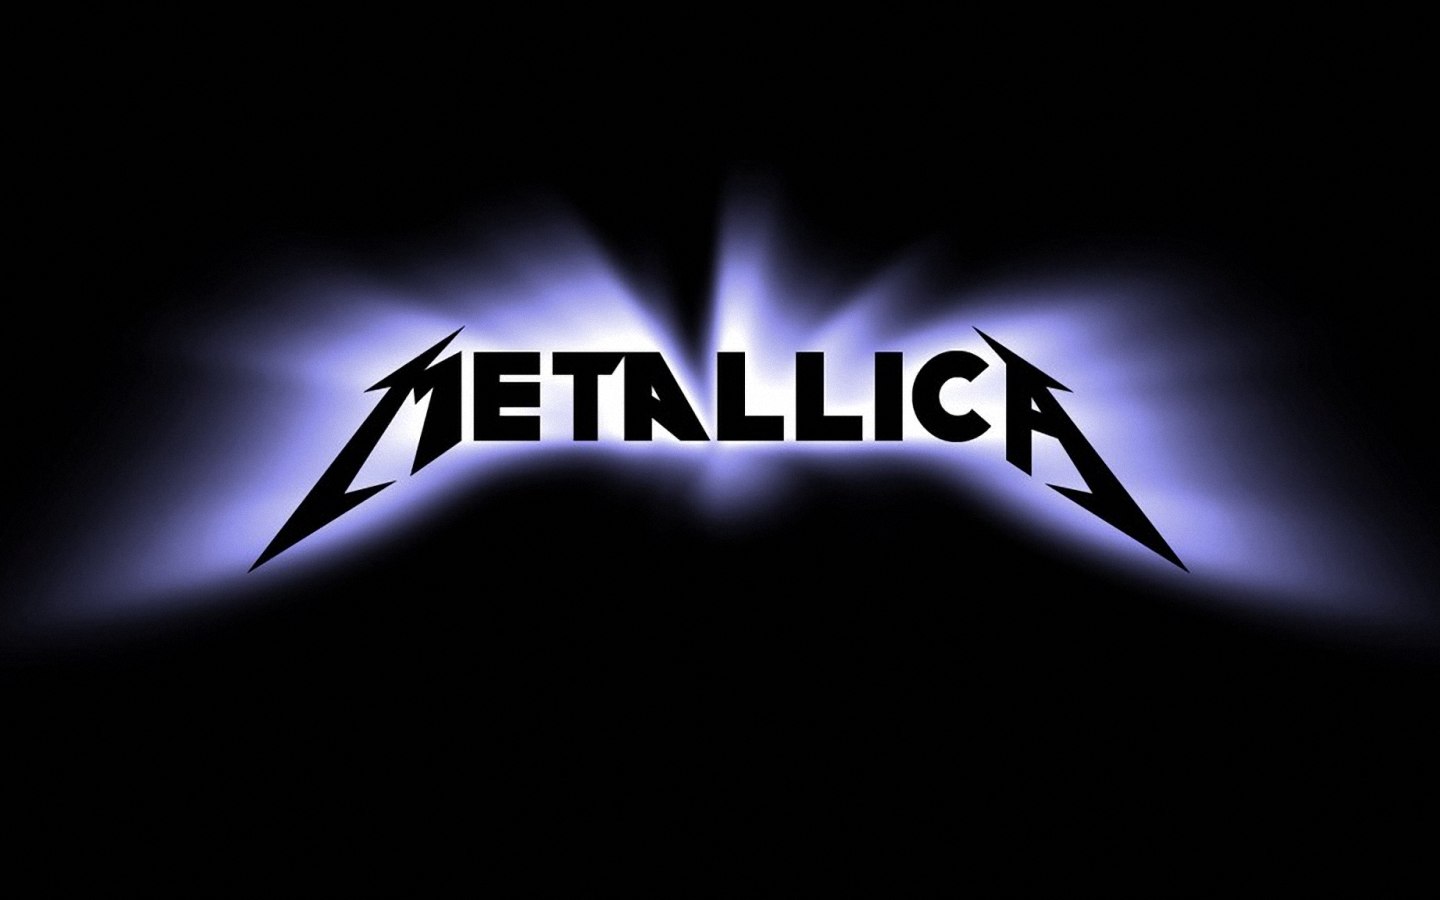 Wallpaper Quality Background With Metallica Background Oct Index